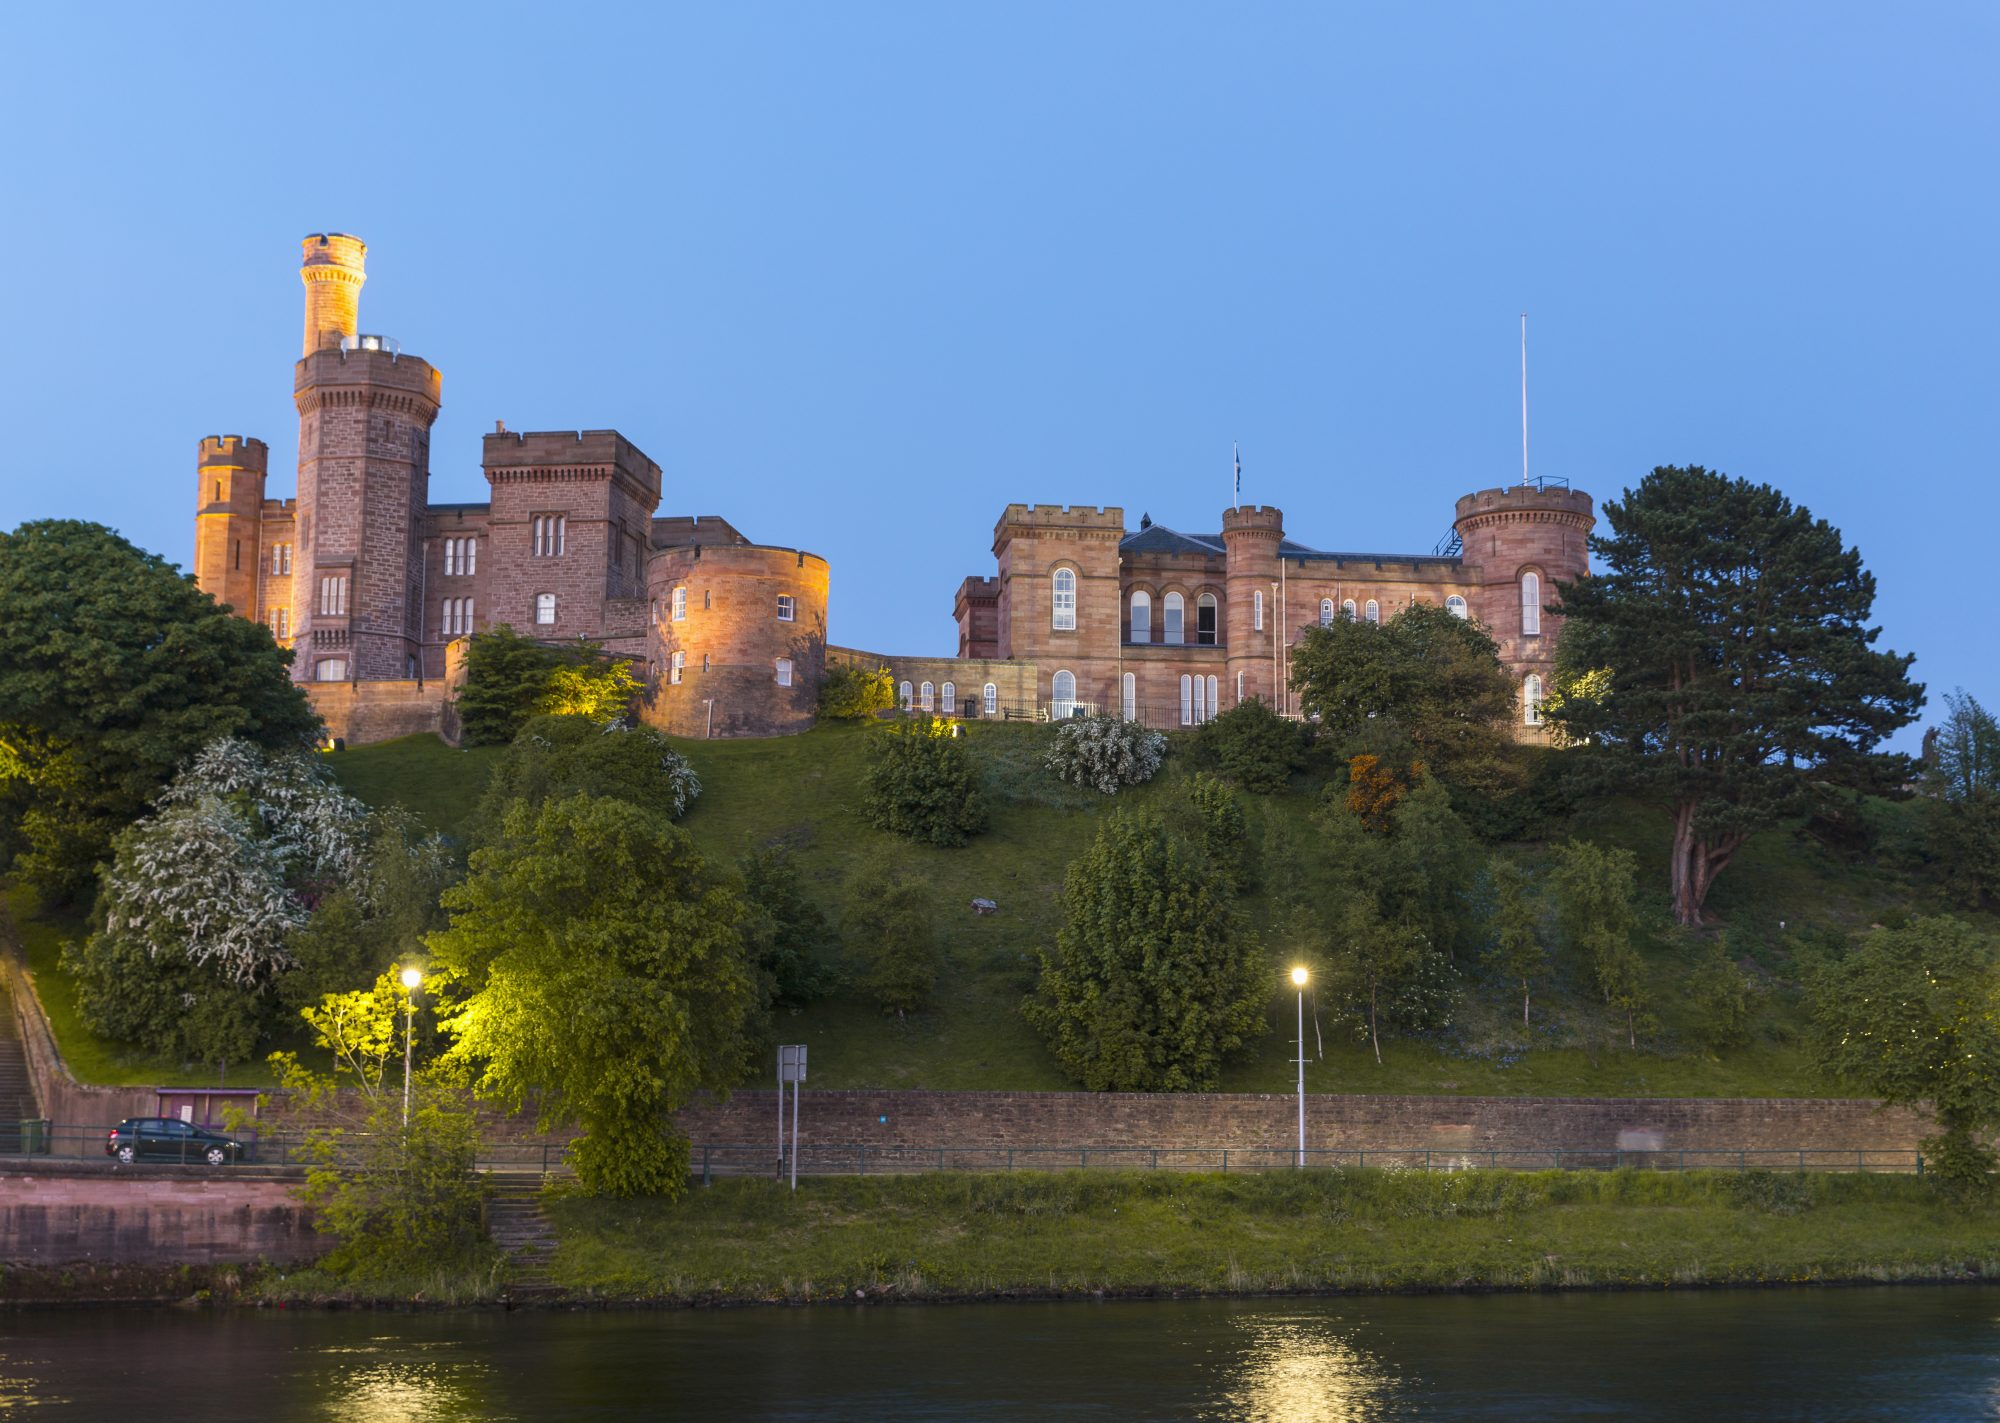 Inverness Castle on the River Ness